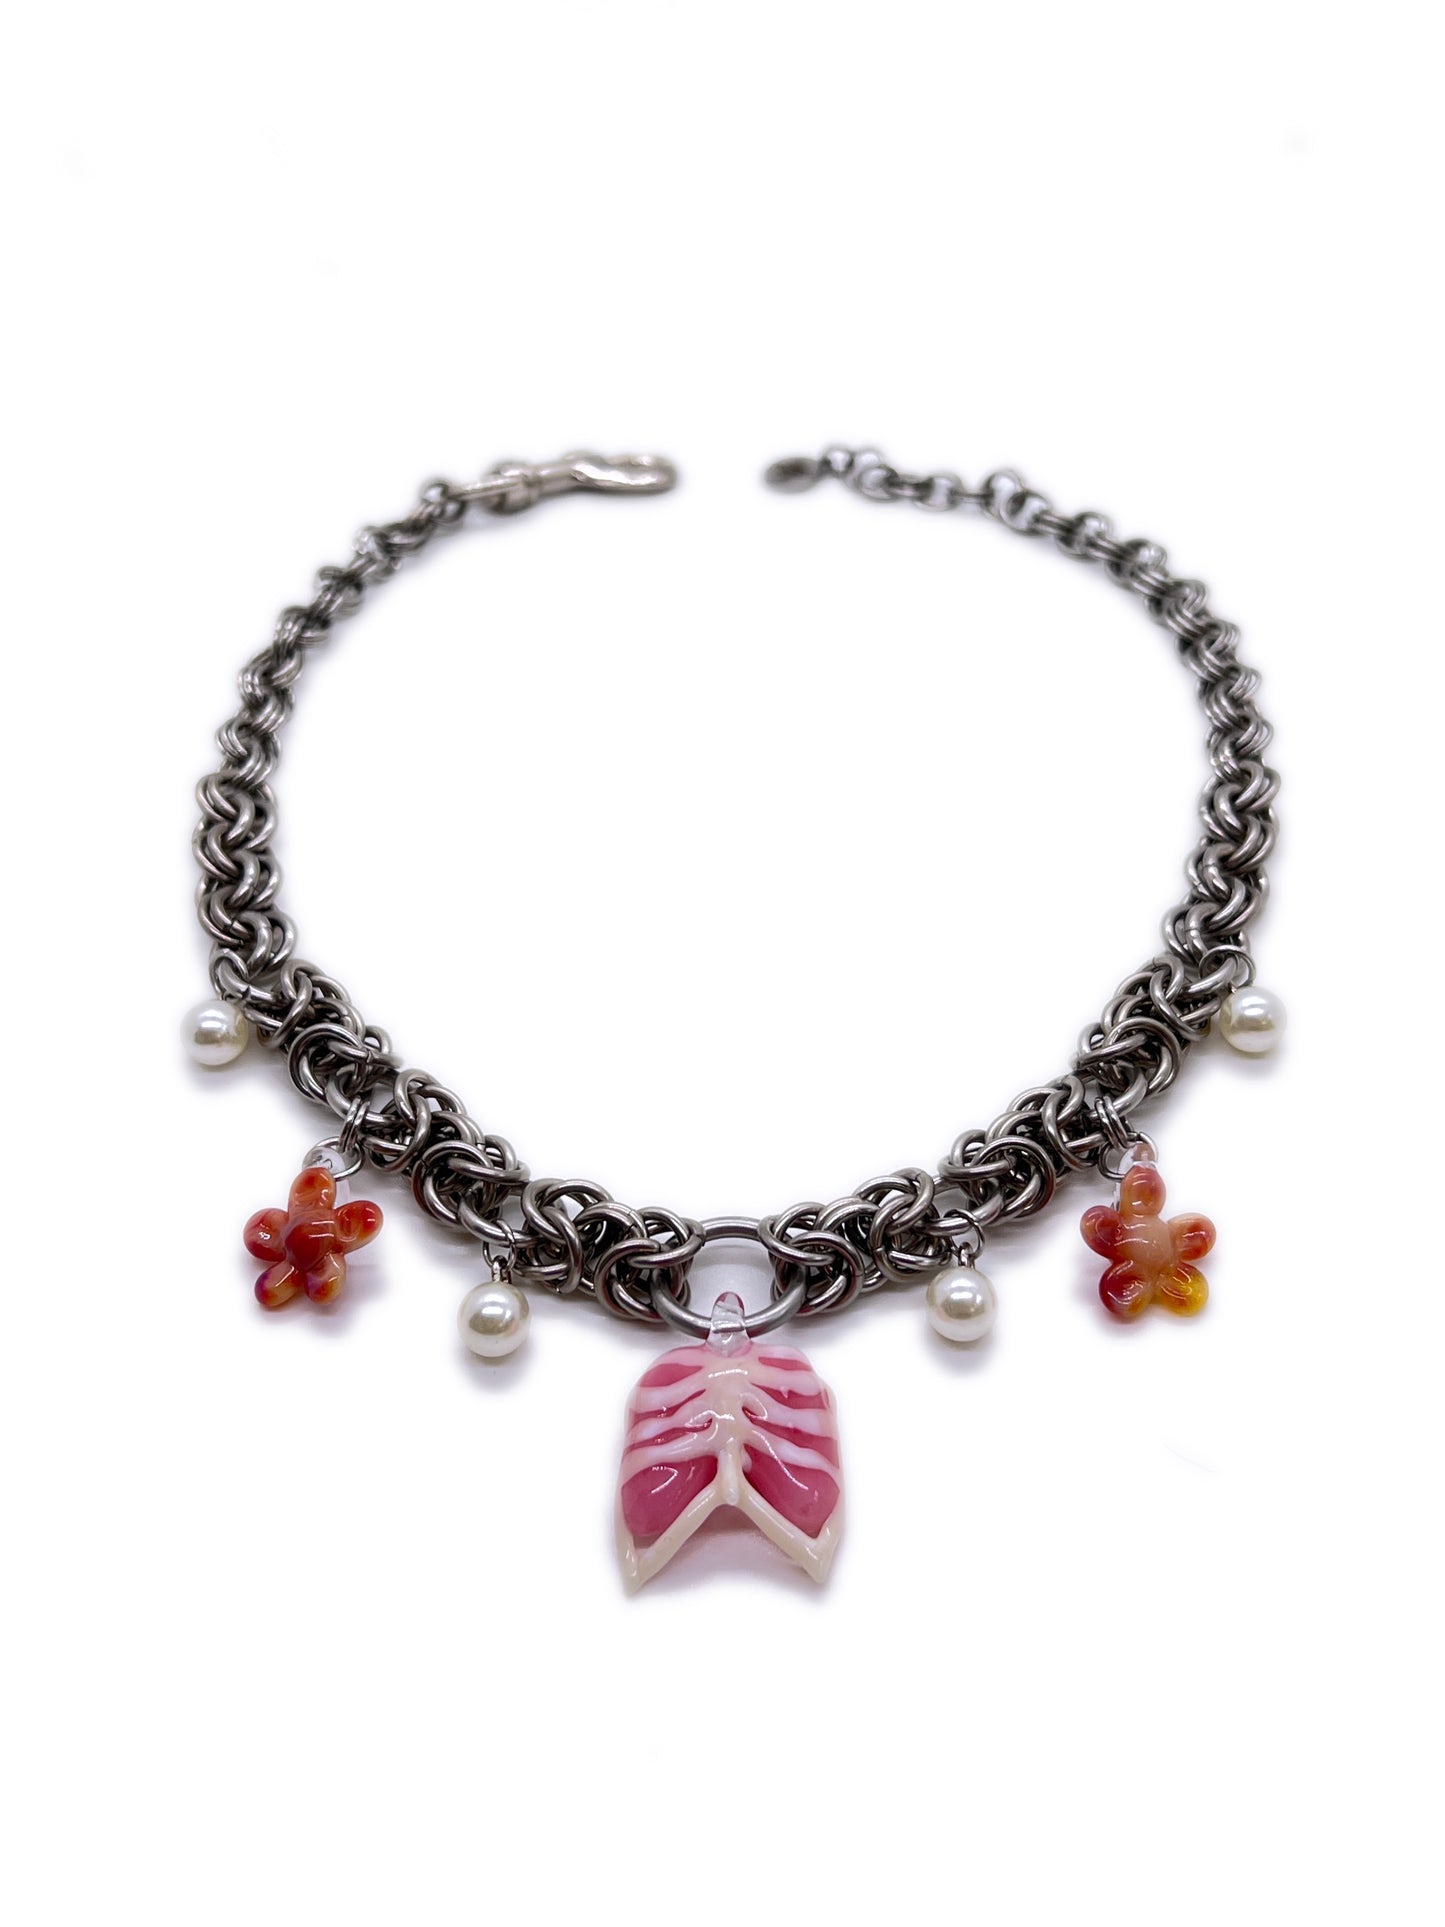 Ribs in Bloom Necklace